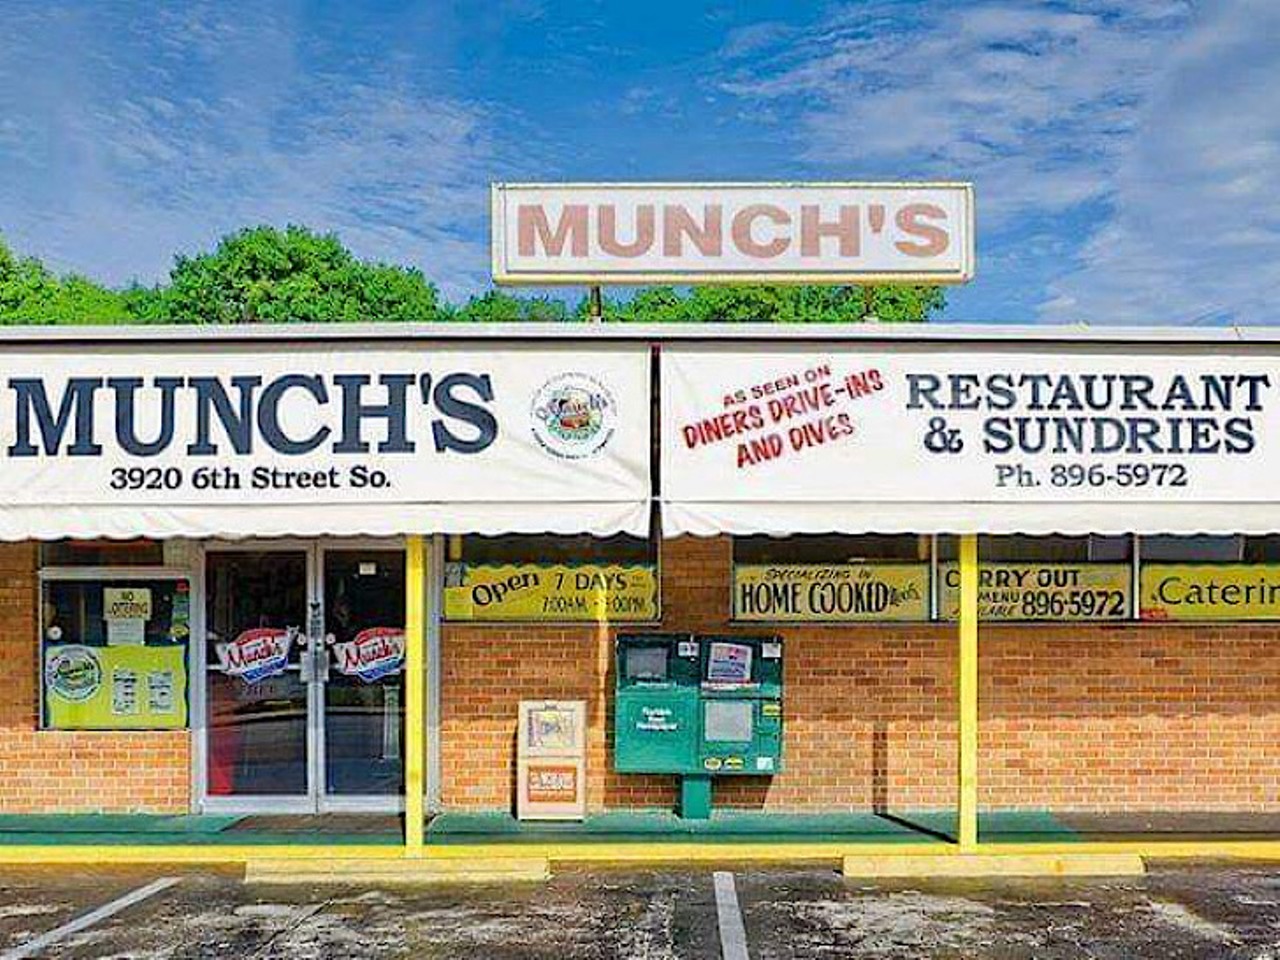 Munch&#146;s Sundries
3920 6th St. S. St. Petersburg,FL
Founded in 1952, Munch&#146;s Sundries have been quite busy since then. They&#146;ve been featured on Diners Drive Ins and Dives, as well as becoming the go-to place for many St. Pete residents. Sundries&#146; offers a huge breakfast menu, along with burgers, fries, chicken and more.
Photo via Munich&#146;s Sundries/Facebook